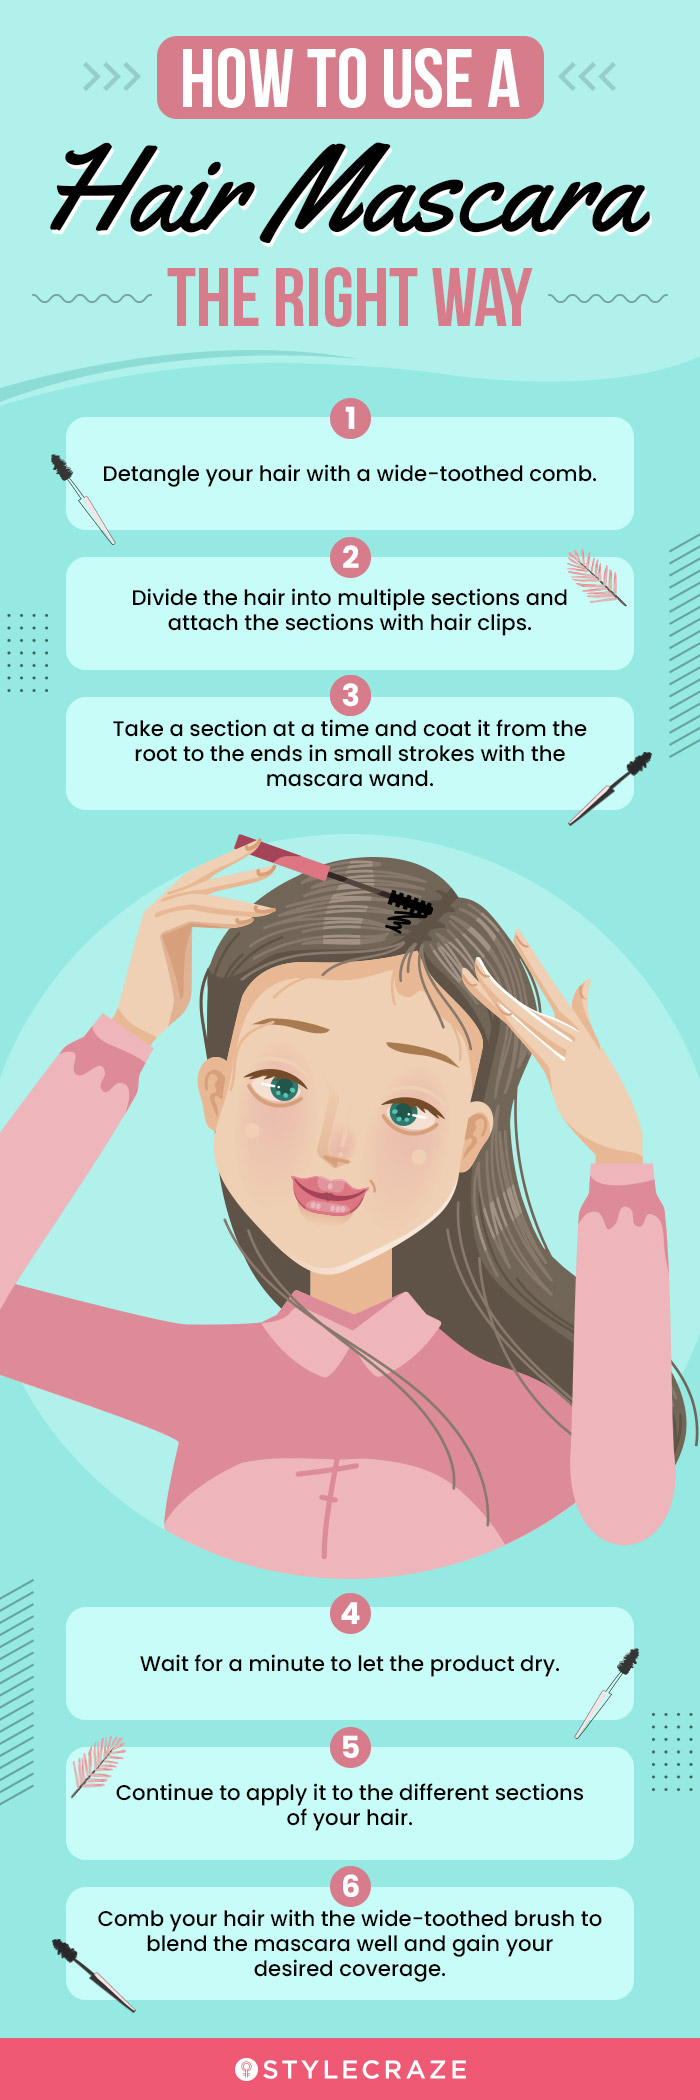 How To Use A Hair Mascara The Right Way (infographic)